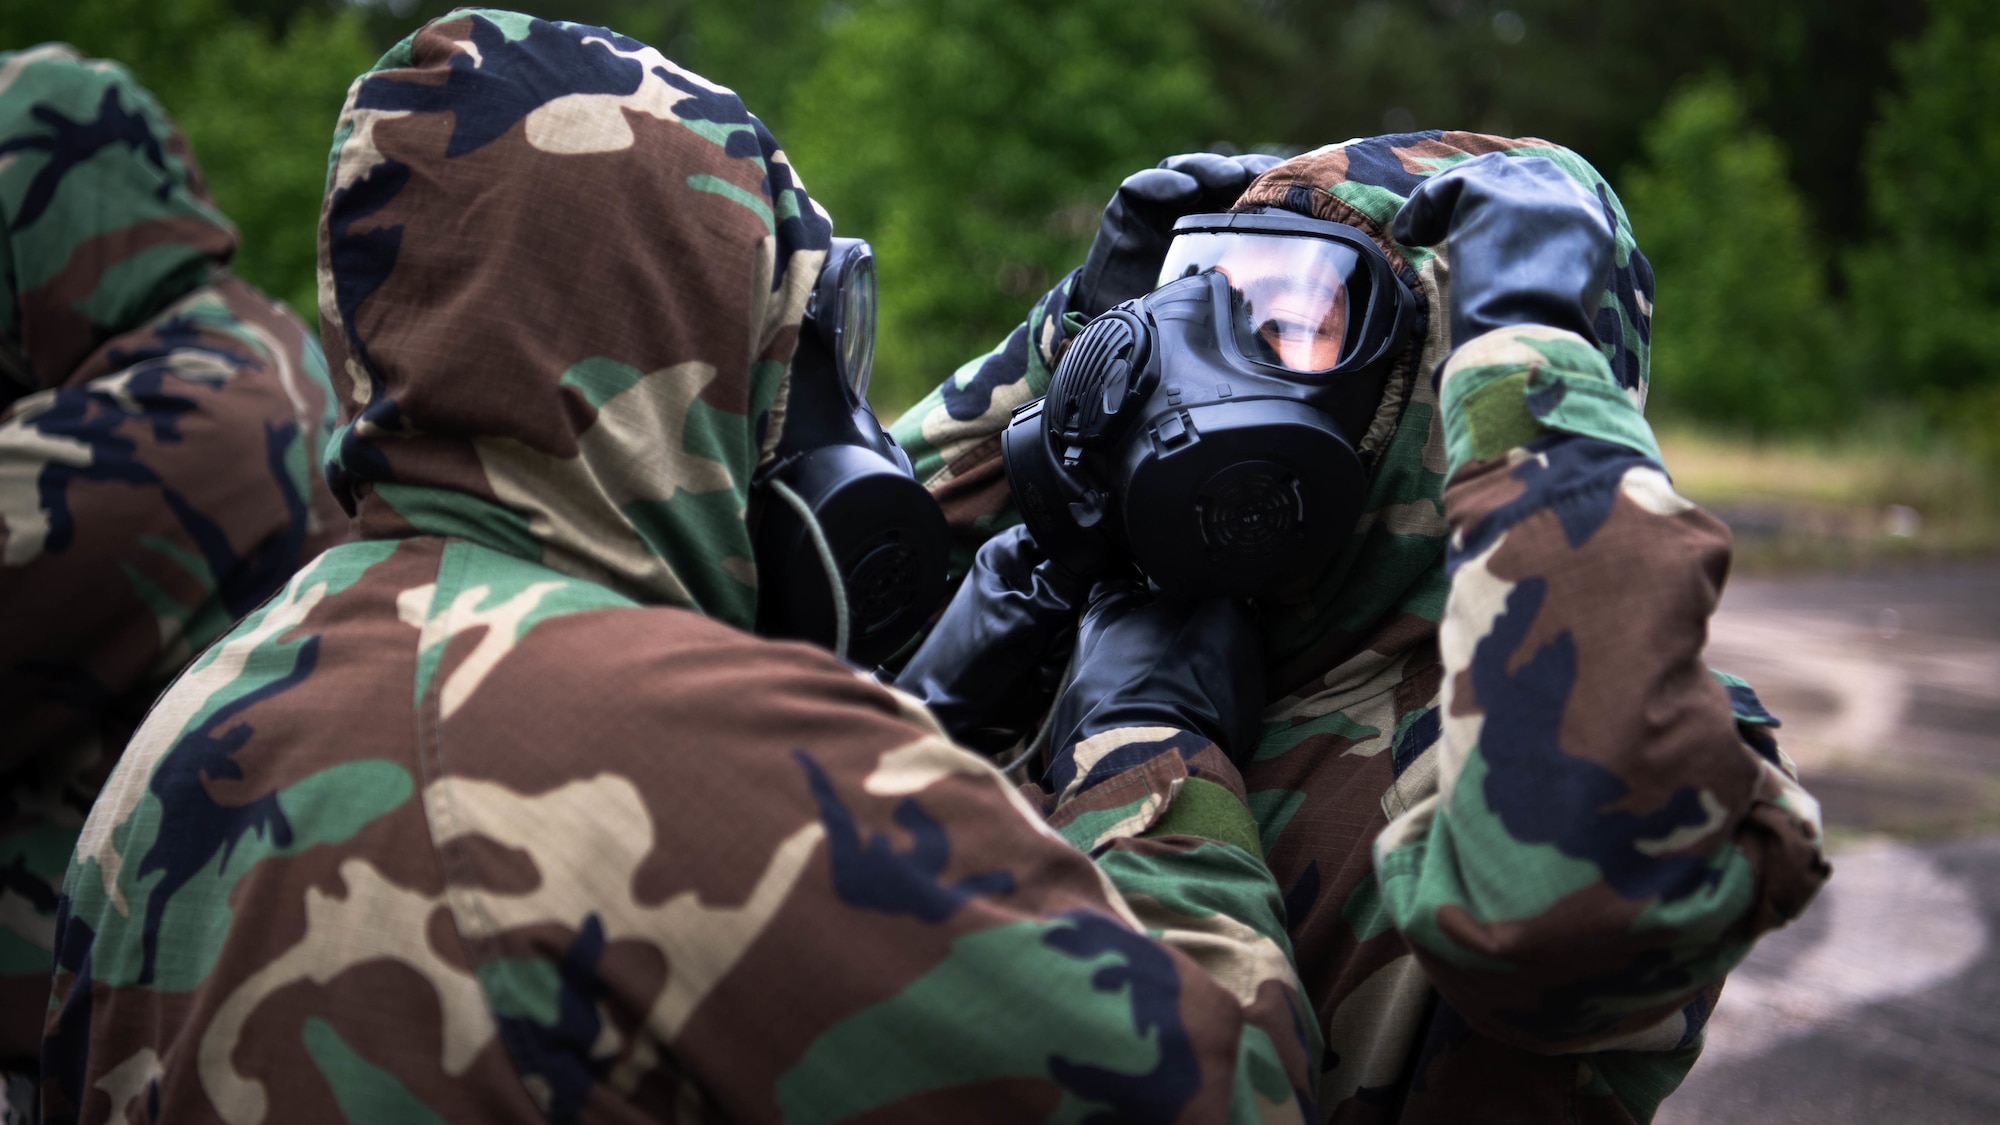 Airmen from the 2nd Civil Engineer Squadron perform "buddy checks'' after donning mission oriented protective posture gear during a 2nd CES training exercise at Barksdale Air Force Base, Louisiana, May 20, 2021. The exercise showcased contingency skills such as: land navigation, self-aid buddy care and chemical, biological, radiological and nuclear preparedness. (U.S. Air Force photo by Senior Airman Jacob B. Wrightsman)